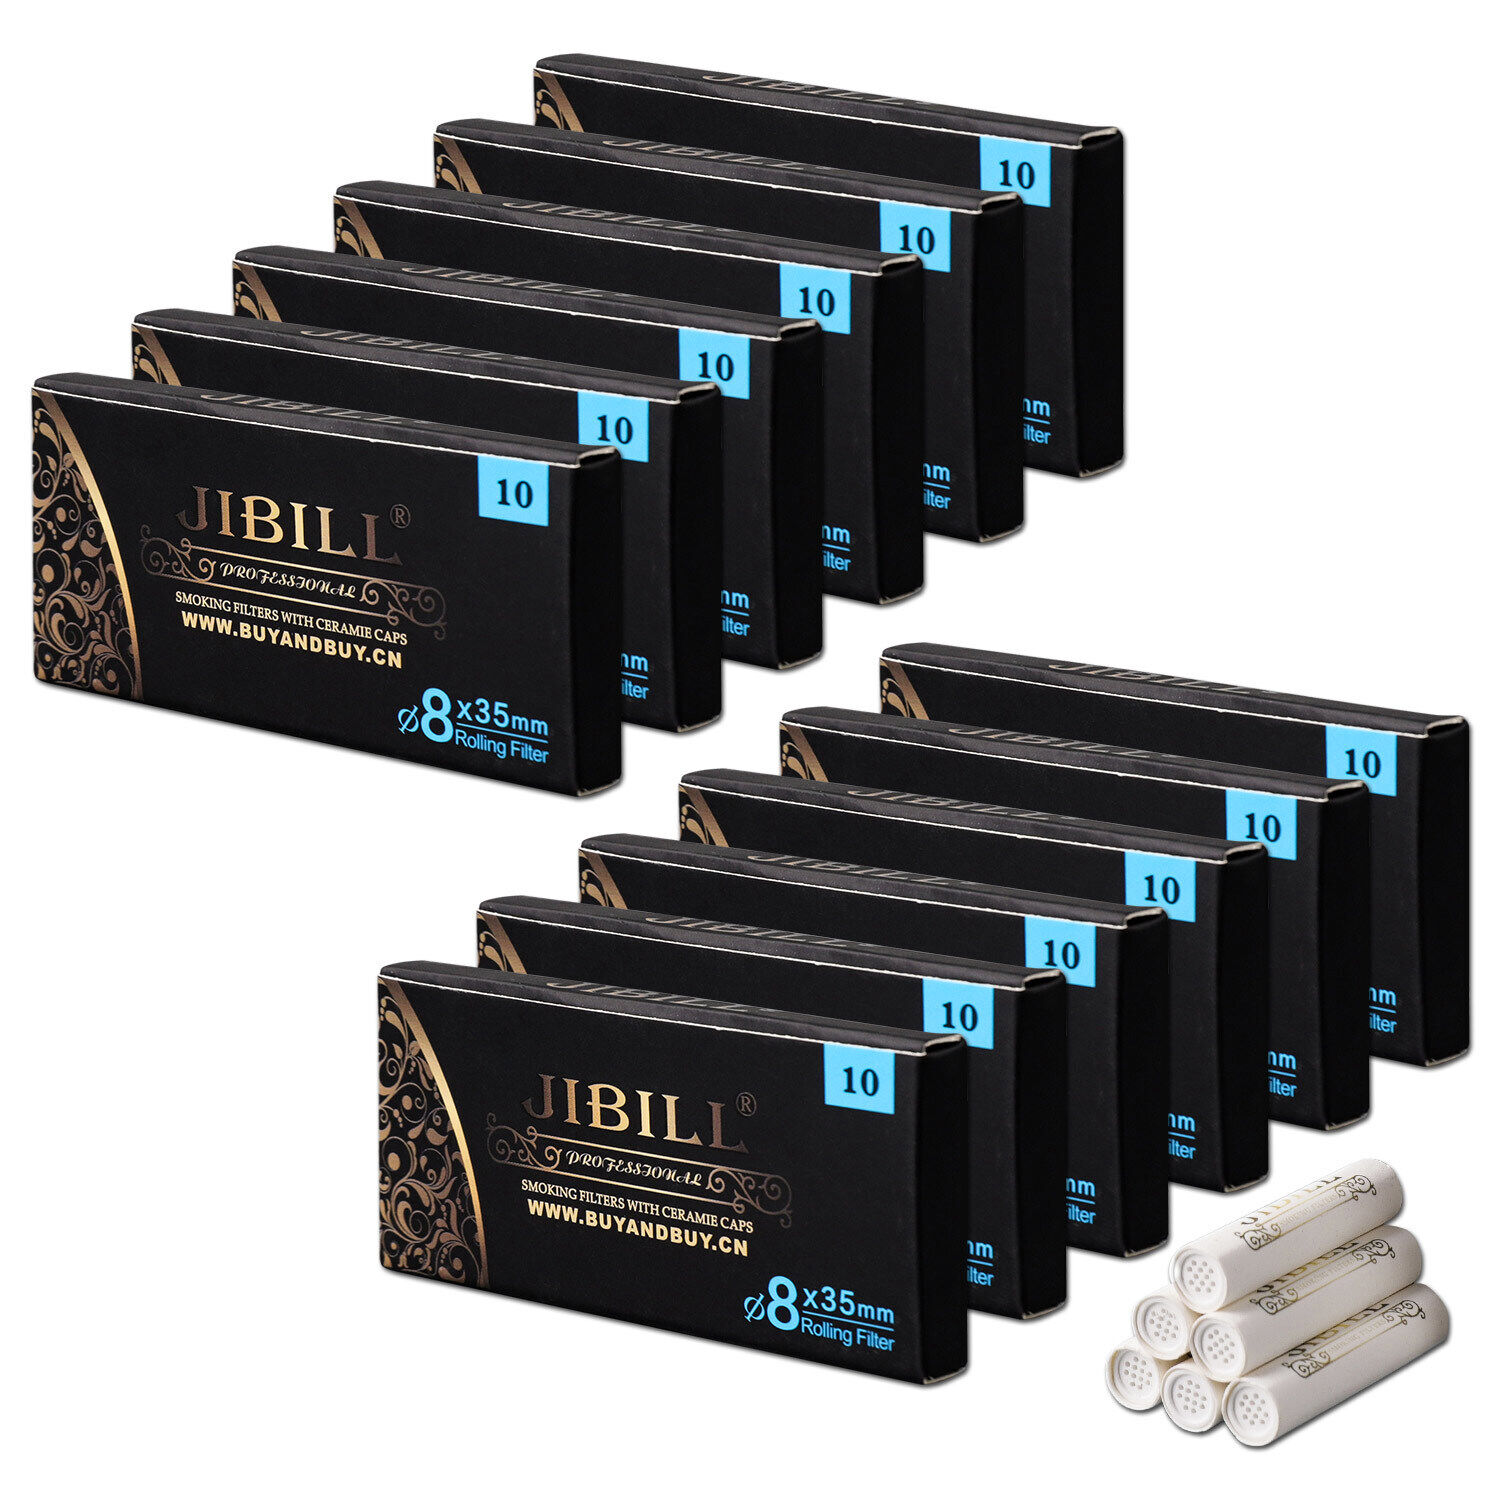 JIBILL 120pcs 8mm Activated Carbon Filters for Tobacco Smoking Pipe Ceramic Caps